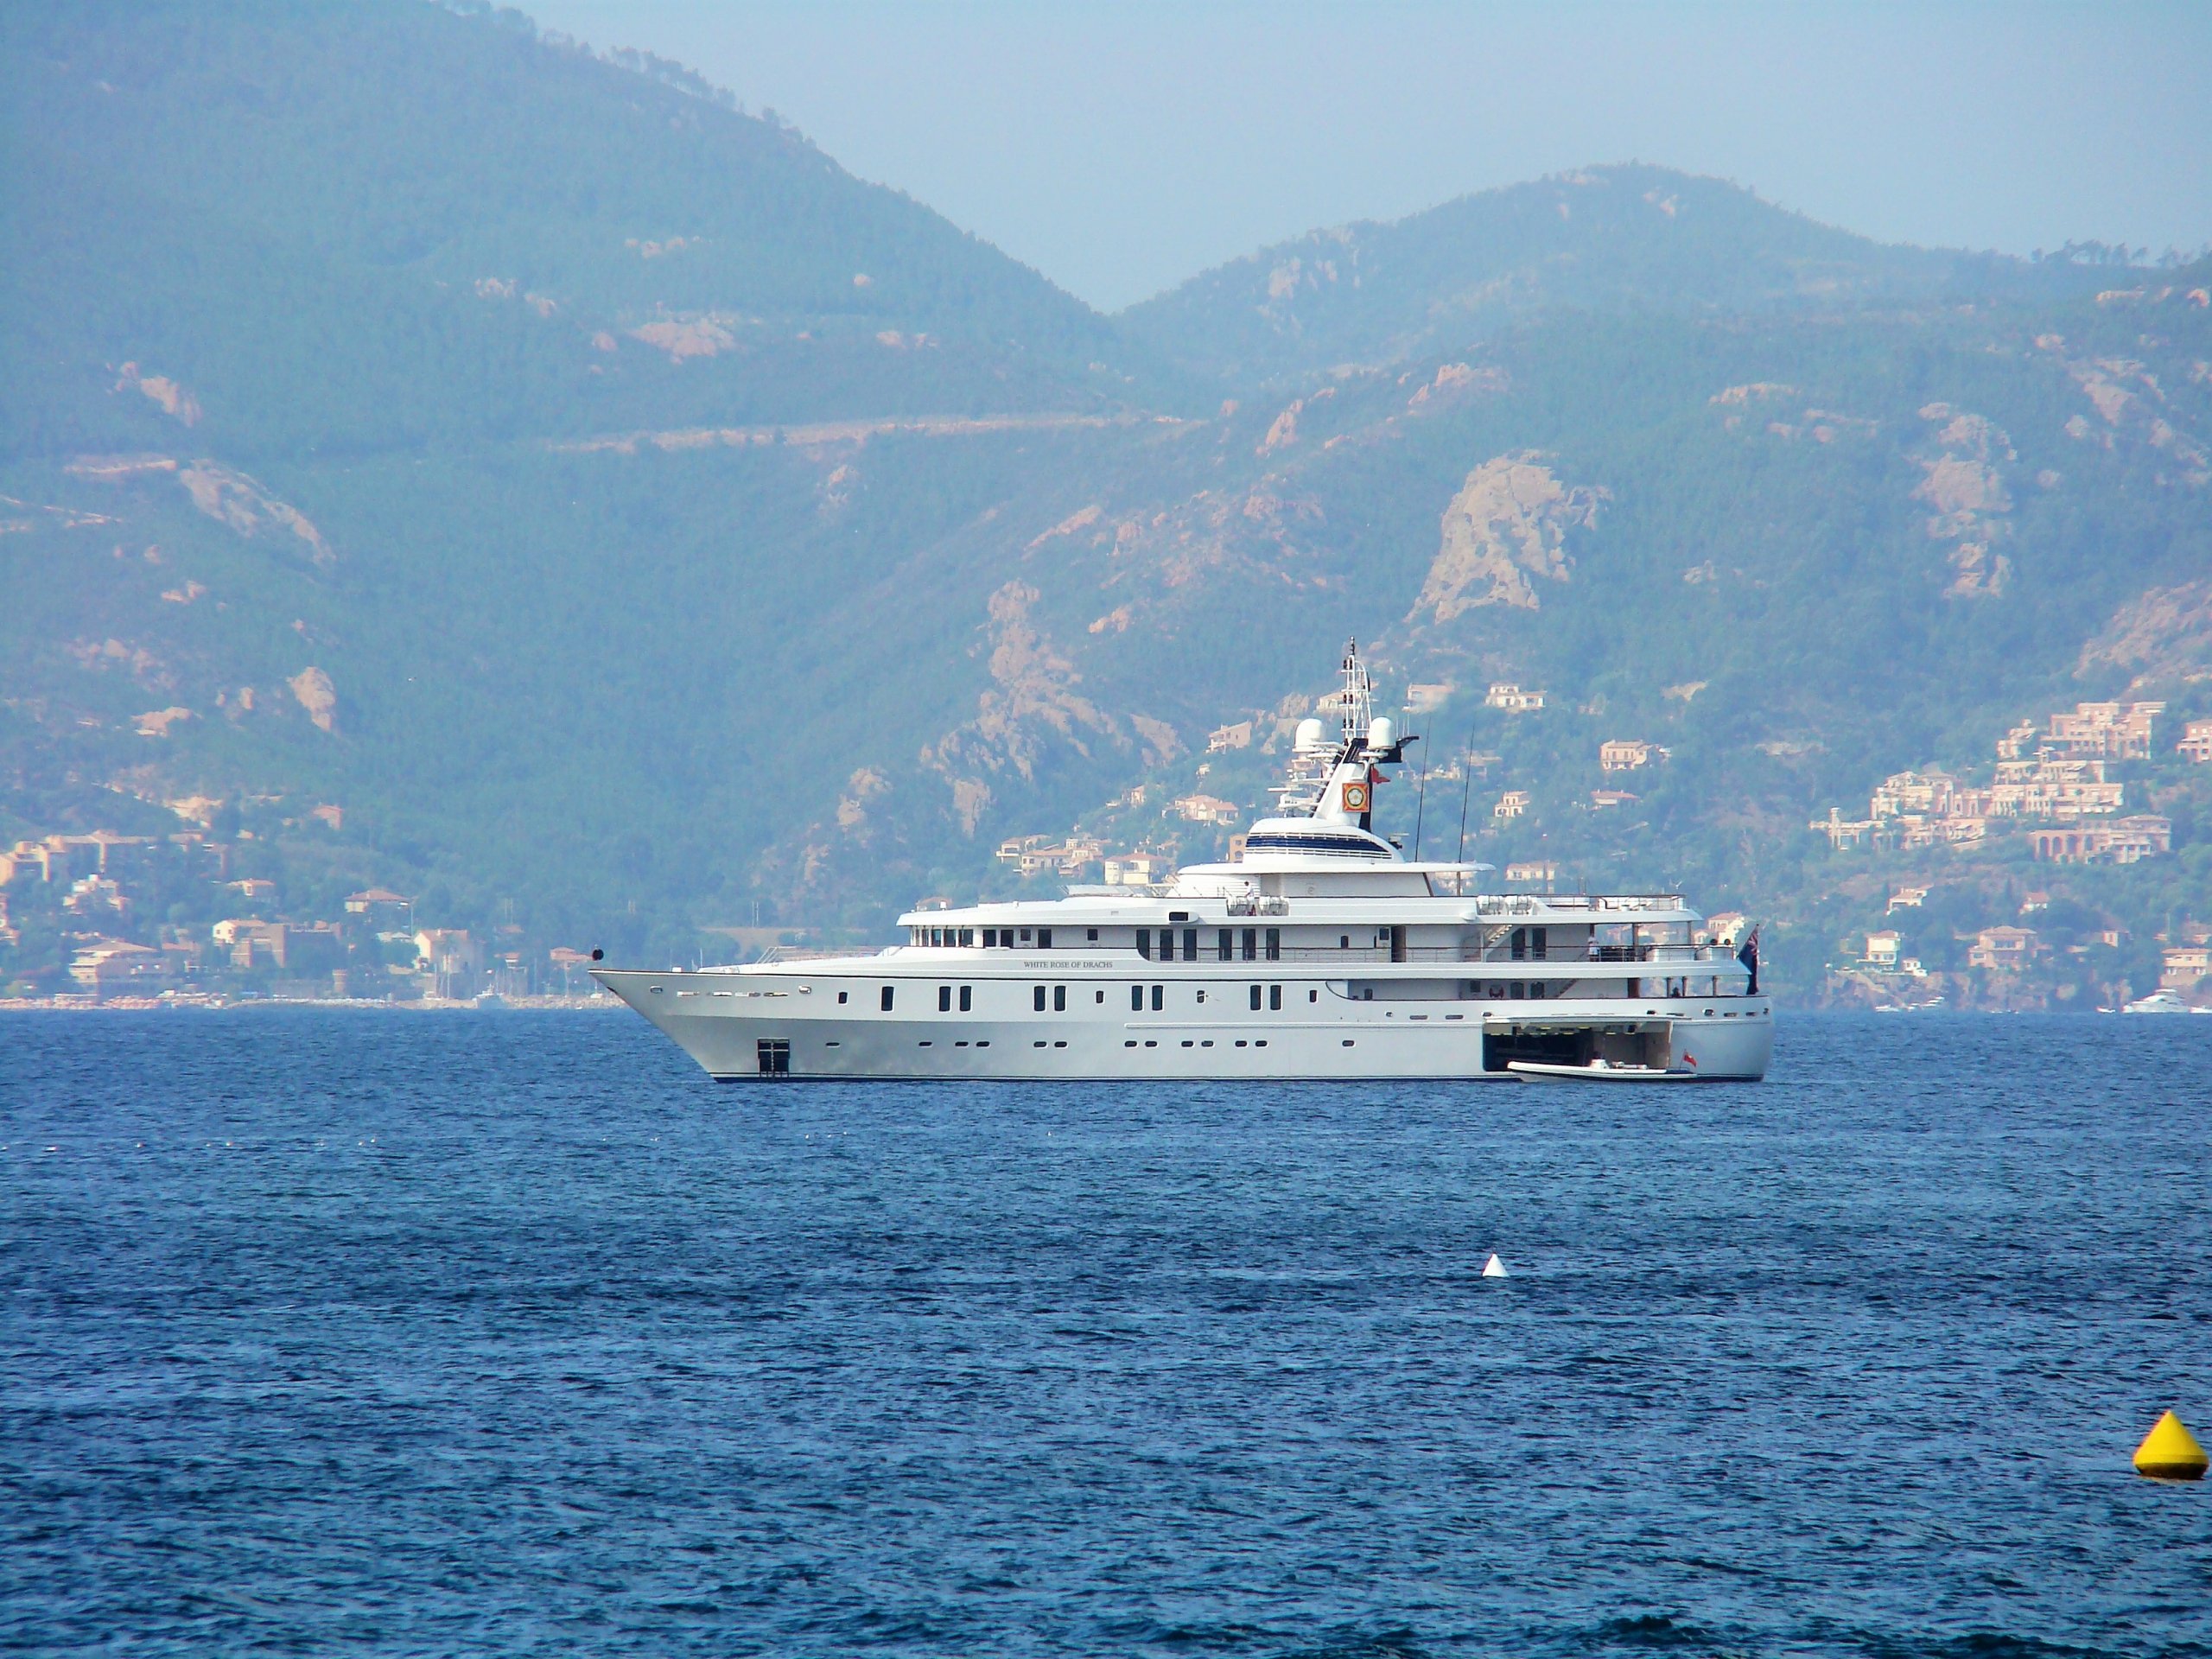 WHITE ROSE OF DRACHS Yacht • Peters Werft • 2004 • Owner Michael Evans